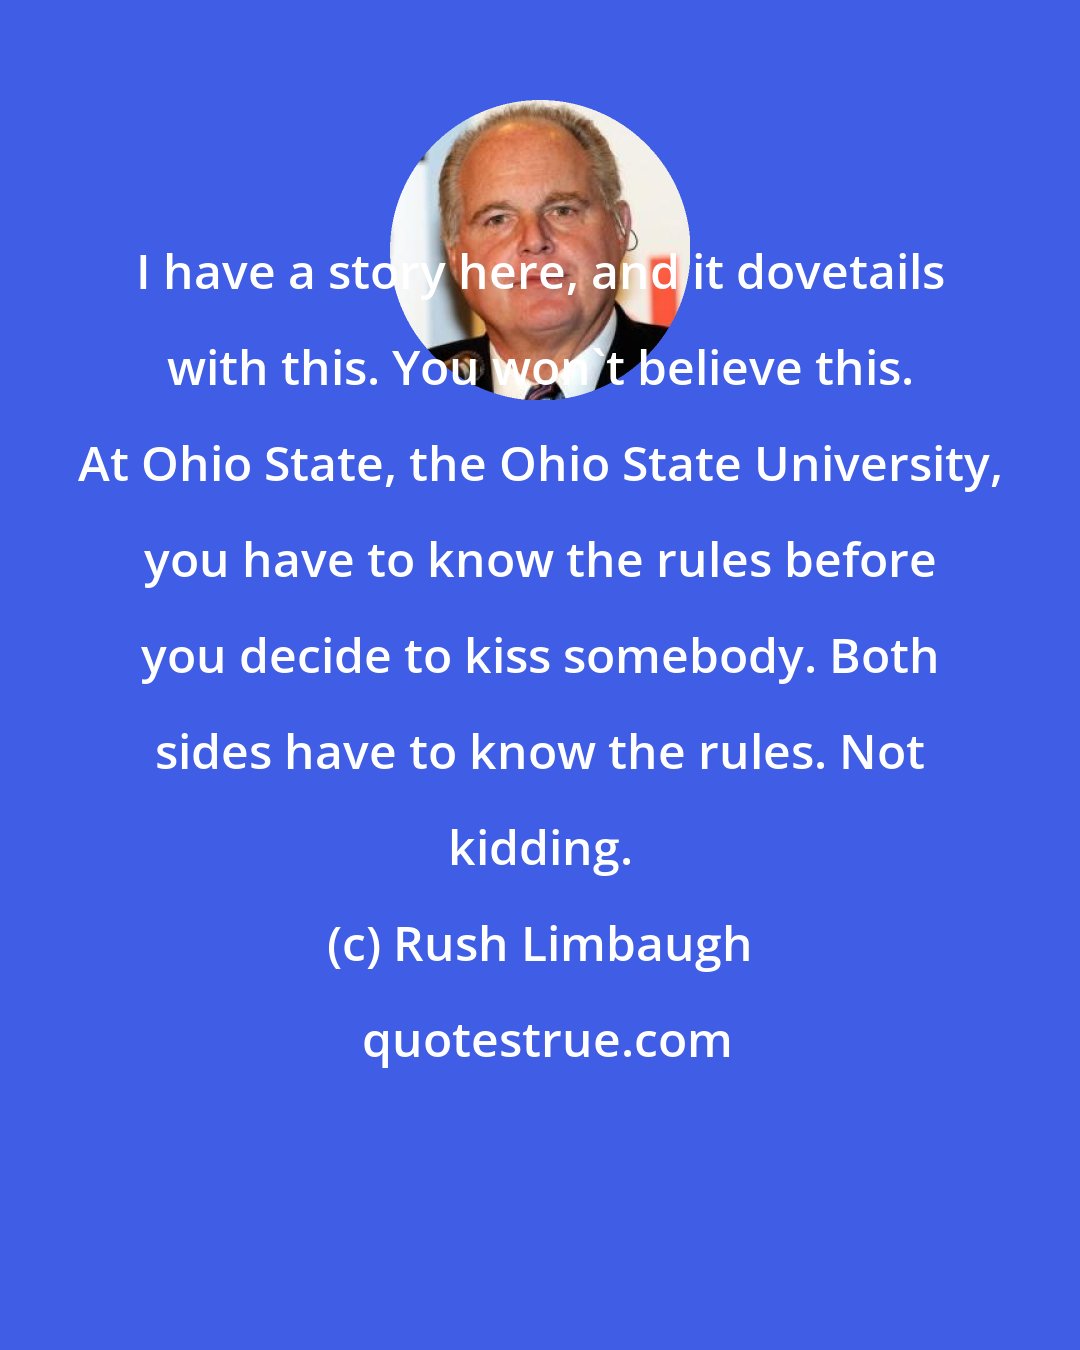 Rush Limbaugh: I have a story here, and it dovetails with this. You won't believe this. At Ohio State, the Ohio State University, you have to know the rules before you decide to kiss somebody. Both sides have to know the rules. Not kidding.